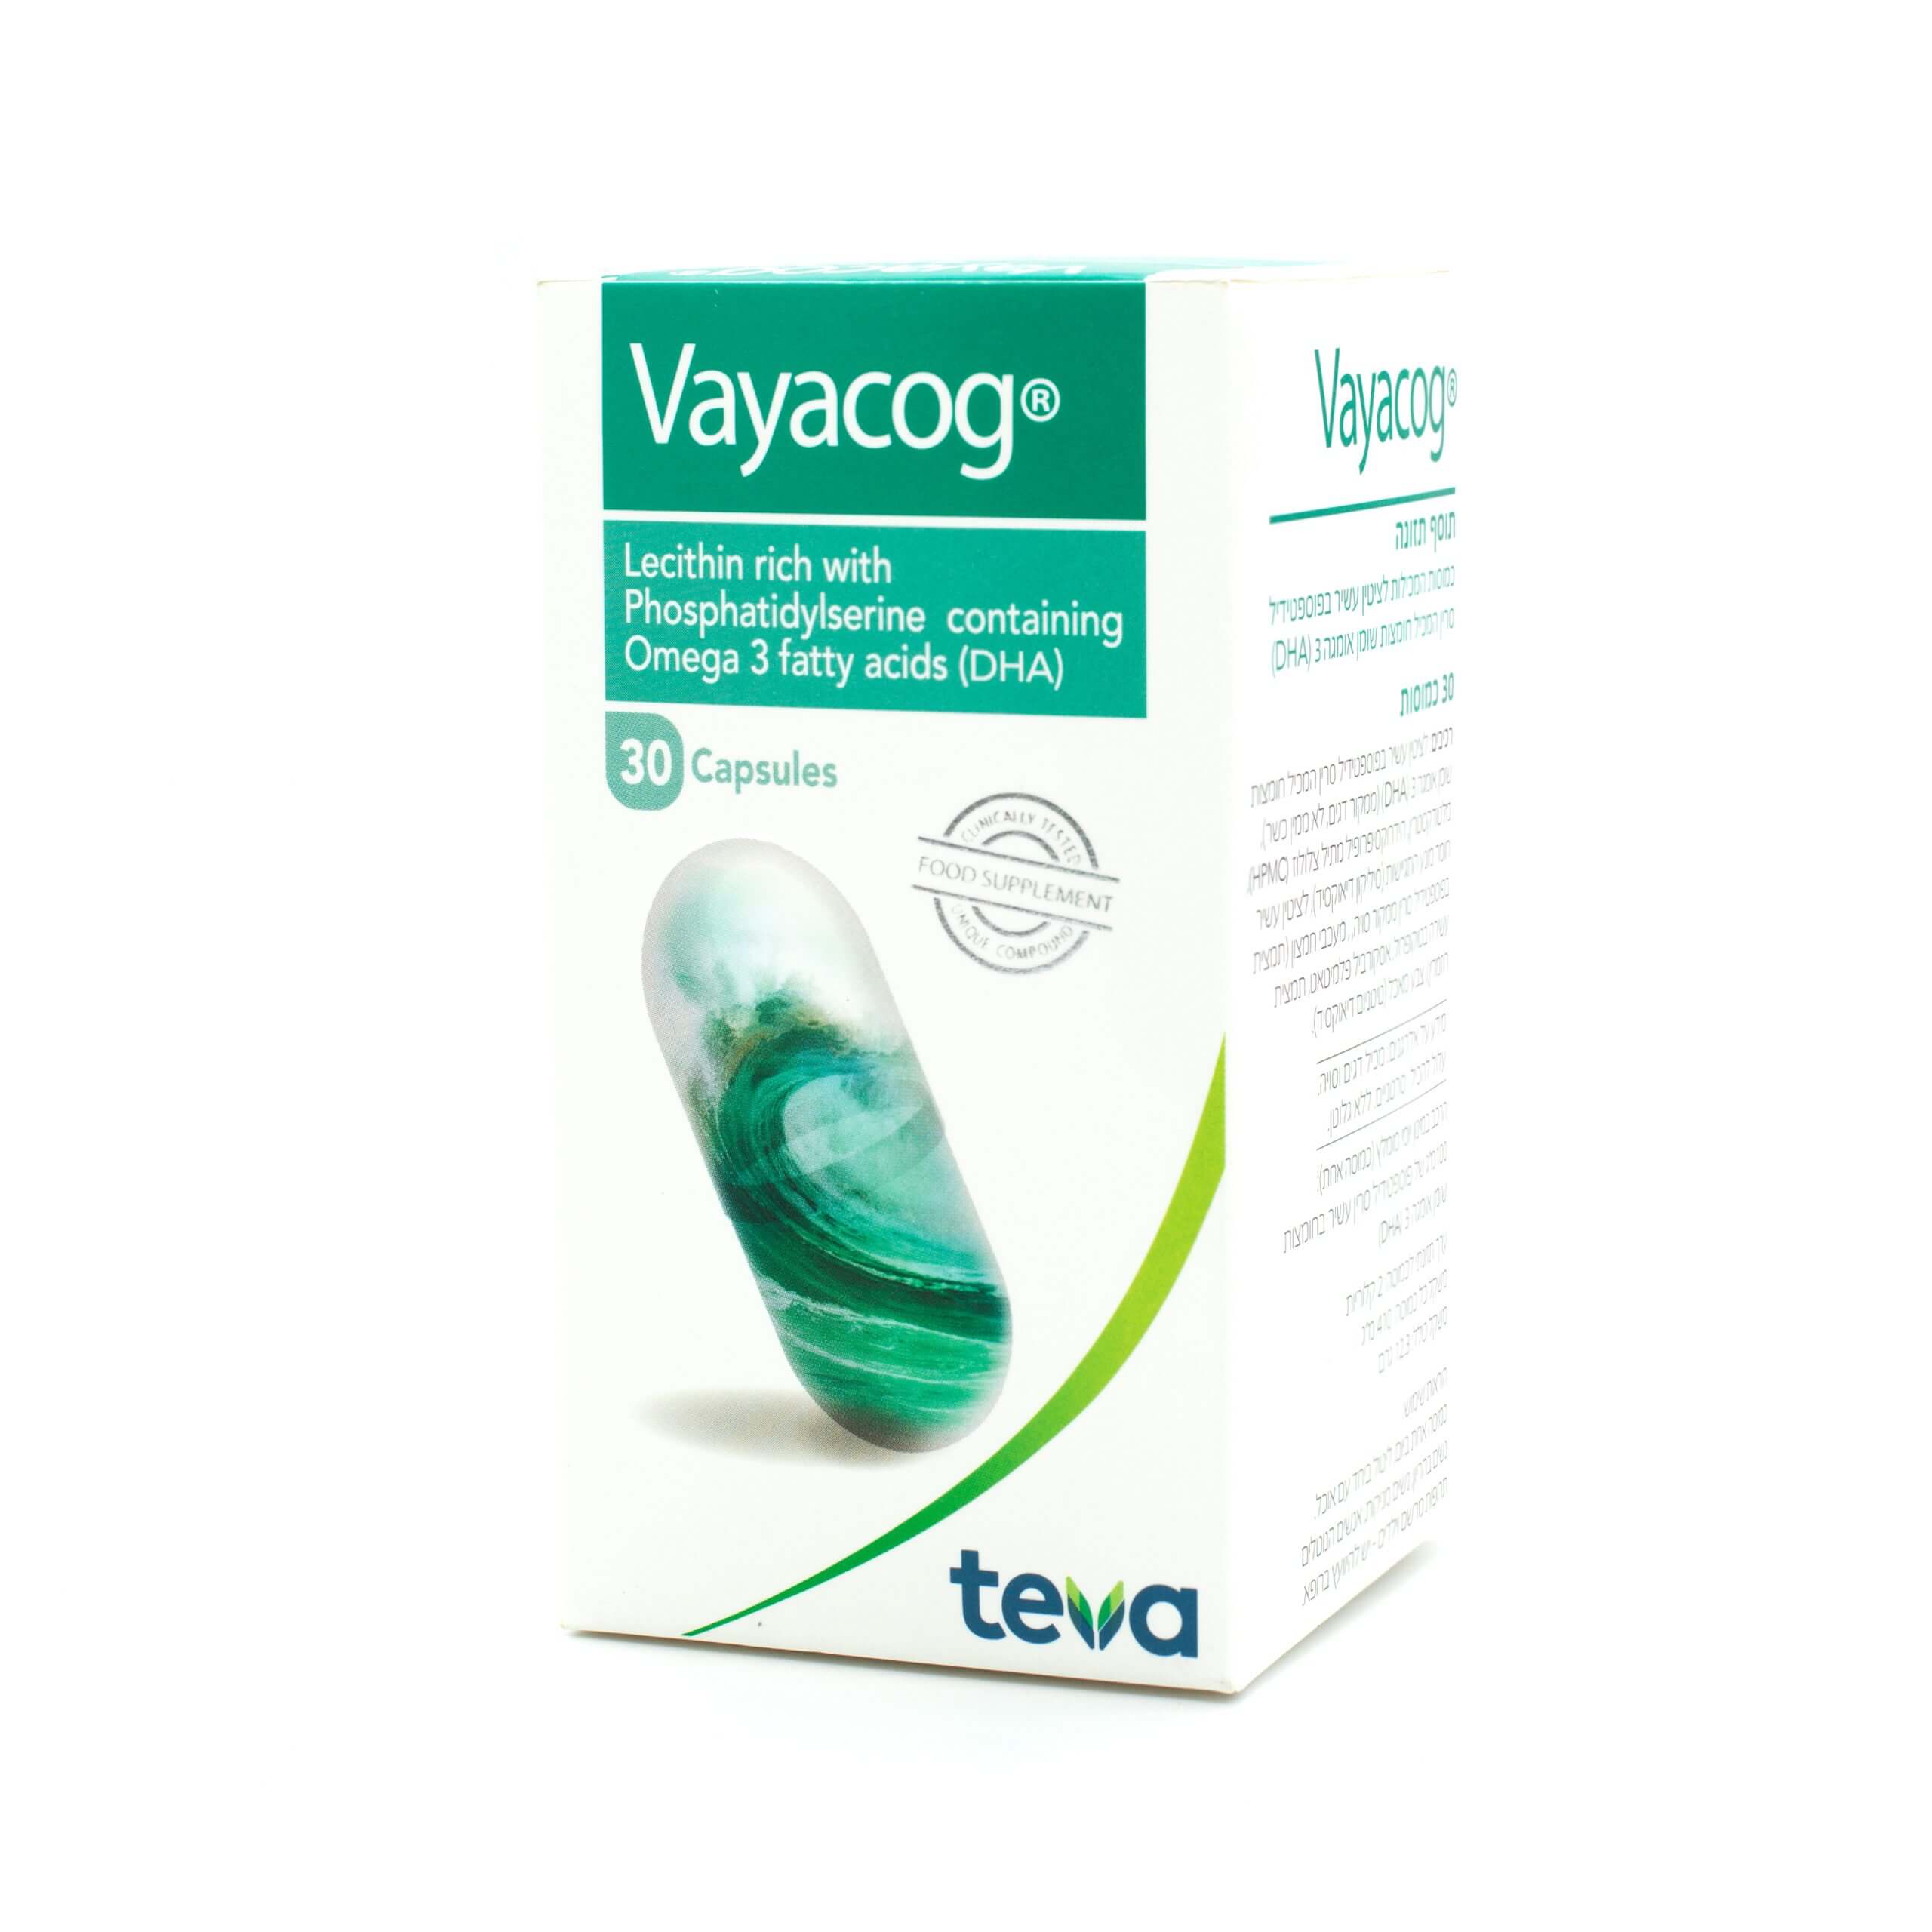 Featured image for “Are There Any Side Effects of Vayacog?”